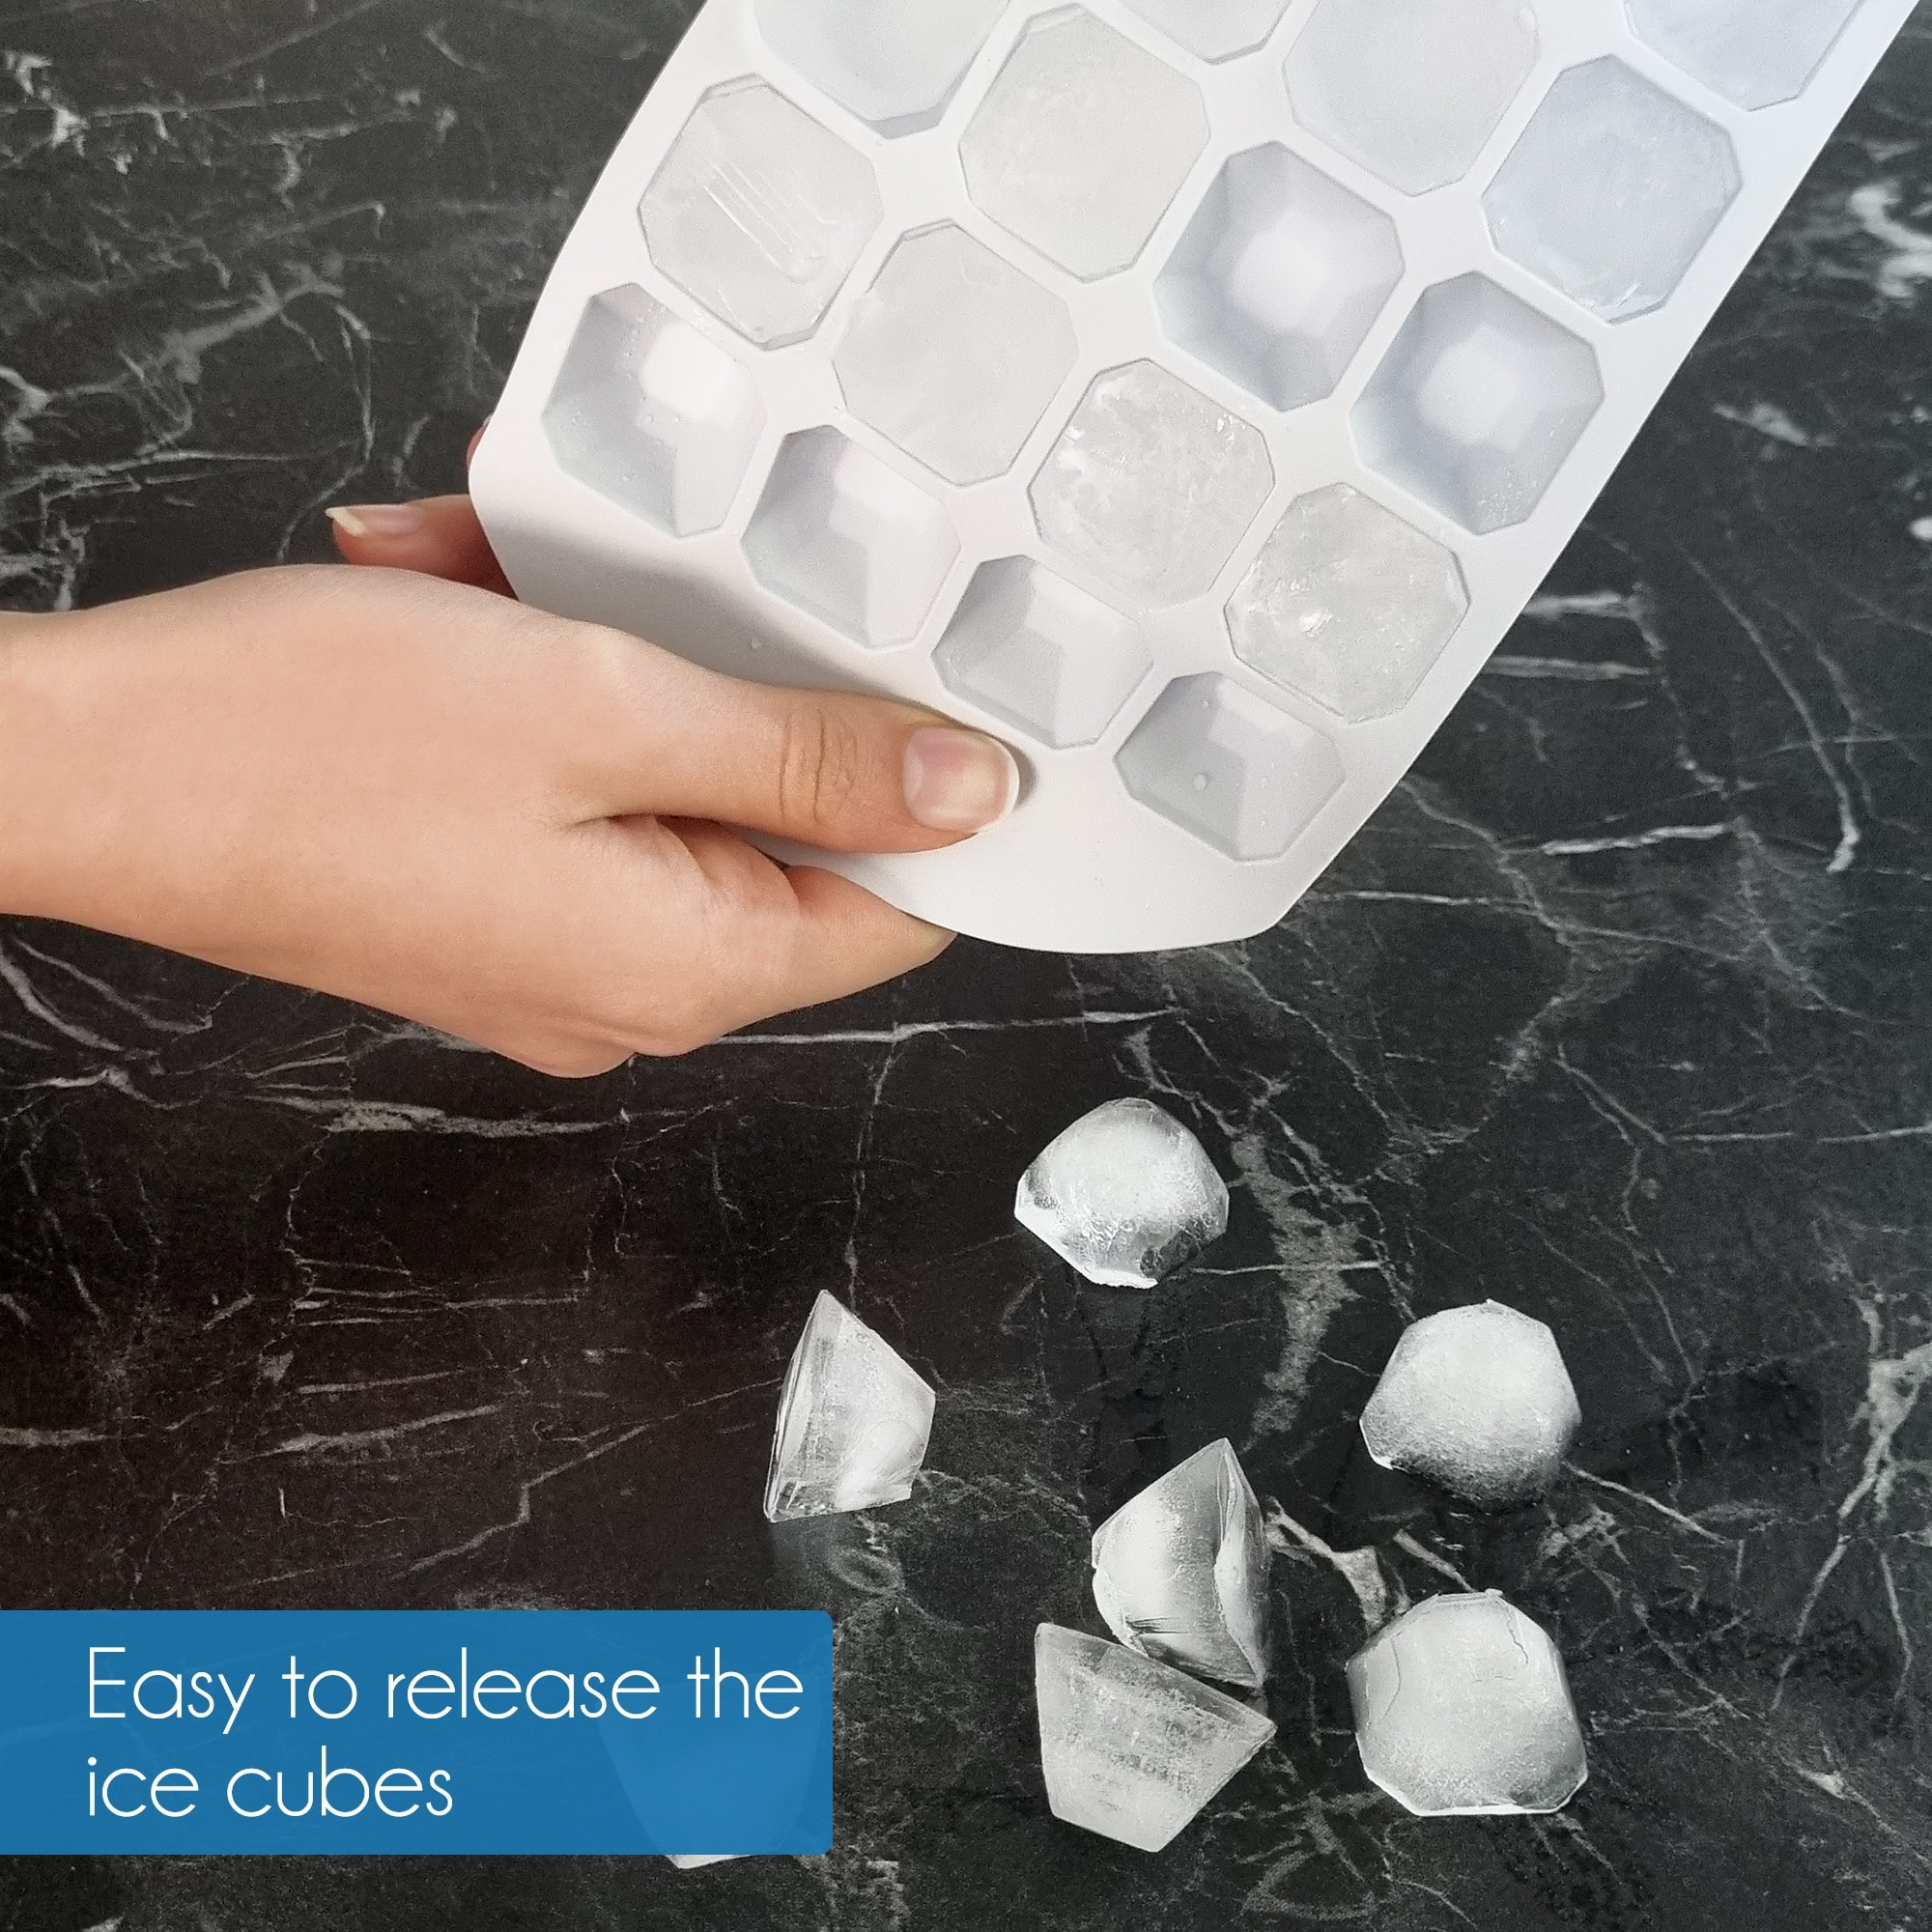 https://ak1.ostkcdn.com/images/products/is/images/direct/abe399f7f5d393318dddca434b85bfb20f3e19d5/3-pcs-Diamond-Ice-Cube-Molds%2C-Large-Ice-Cube-Trays-For-Cocktails%2C-Whiskey-Ice-Cubes-Mold%2C-Easy-Release-Flexible-Ice-Trays.jpg